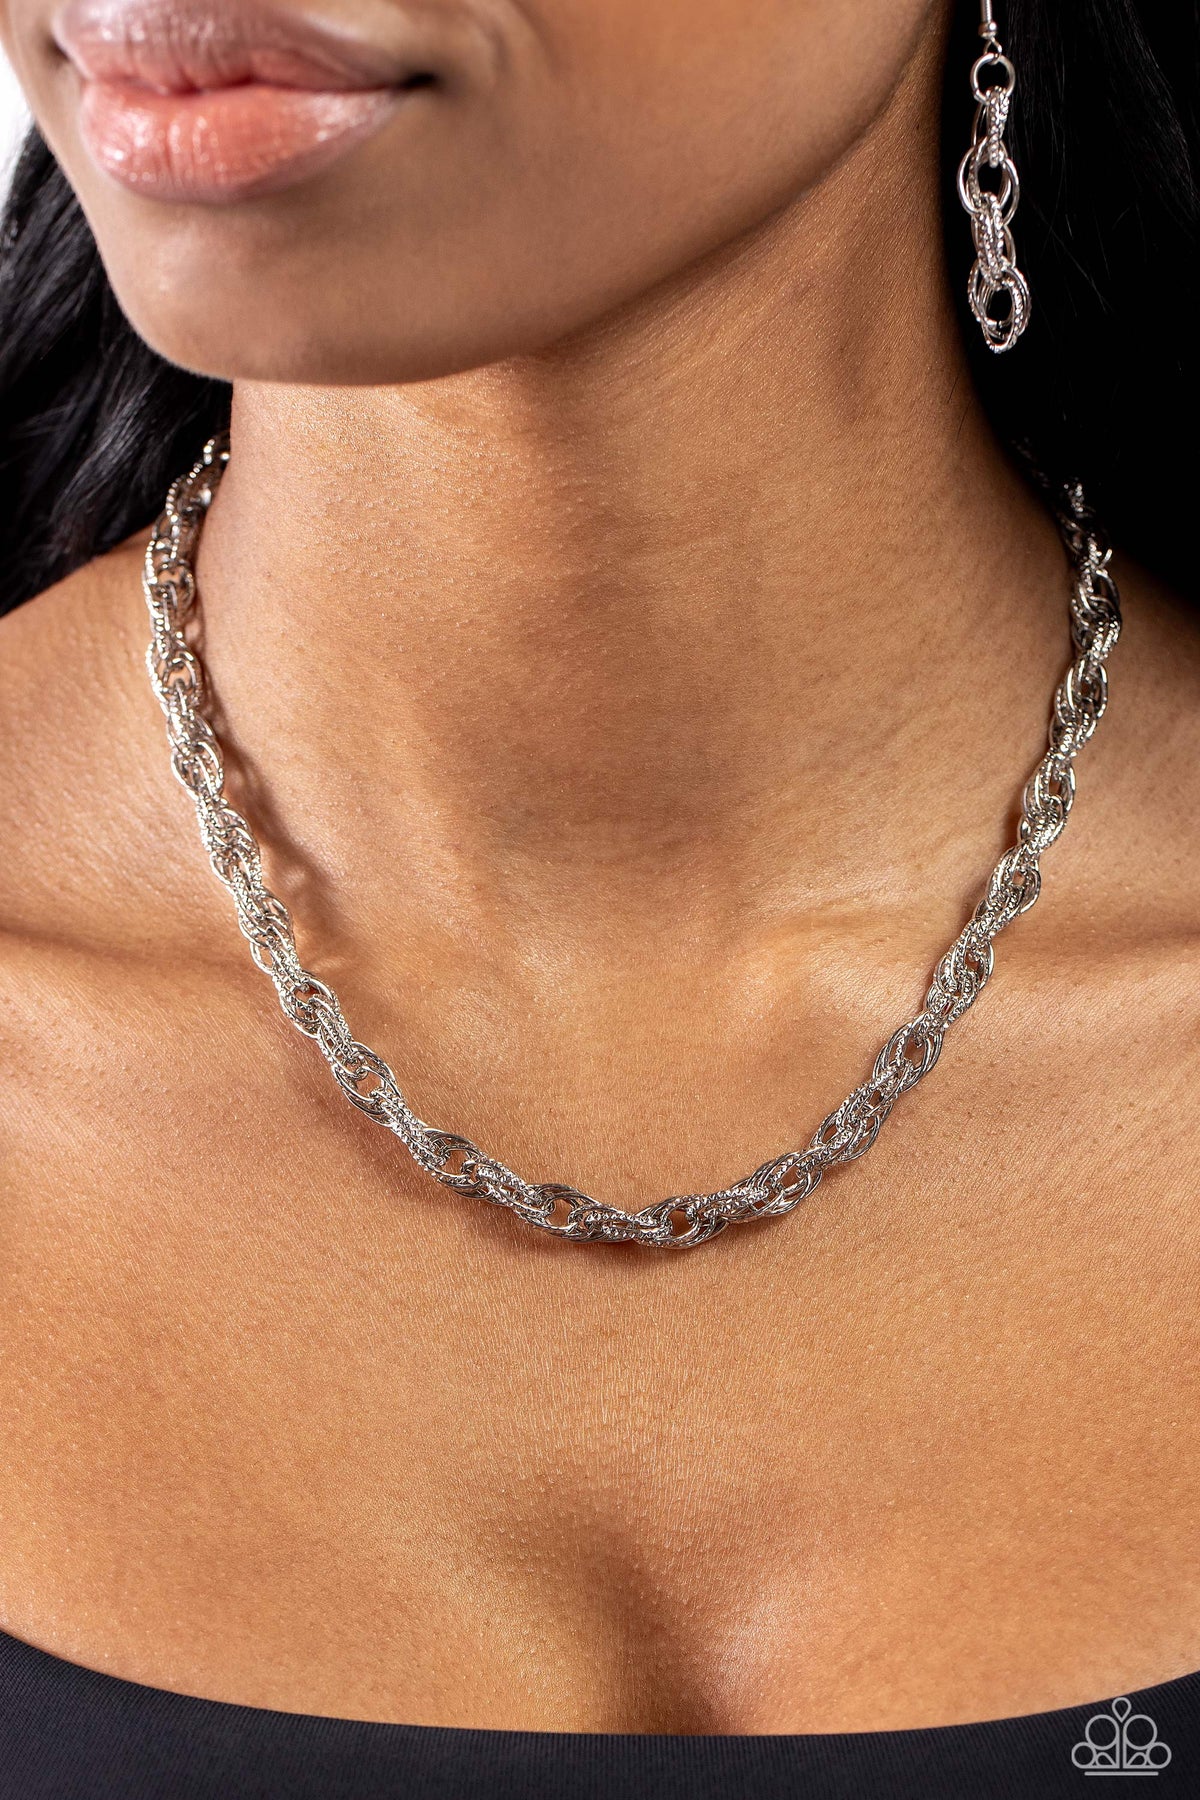 Braided Ballad Silver Chain Necklace - Paparazzi Accessories-on model - CarasShop.com - $5 Jewelry by Cara Jewels